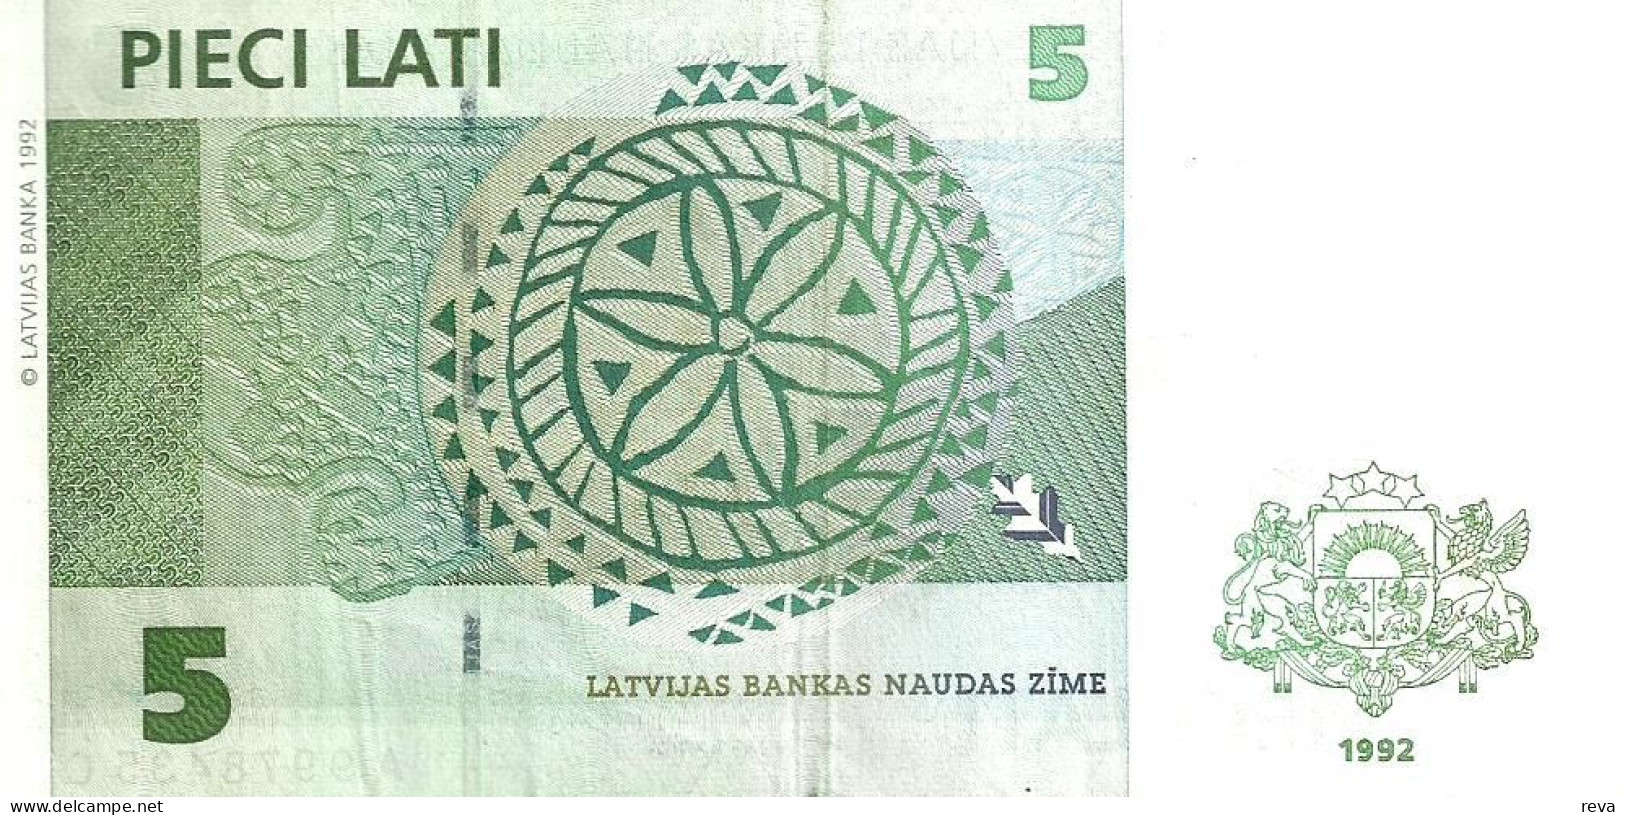 LATVIA  5 LATI GREEN TREE FRONT & ABSTRACT DESING BACK DATED 1992 VF+/VF+ P.43a READ DESCRIPTION !! - Letonia